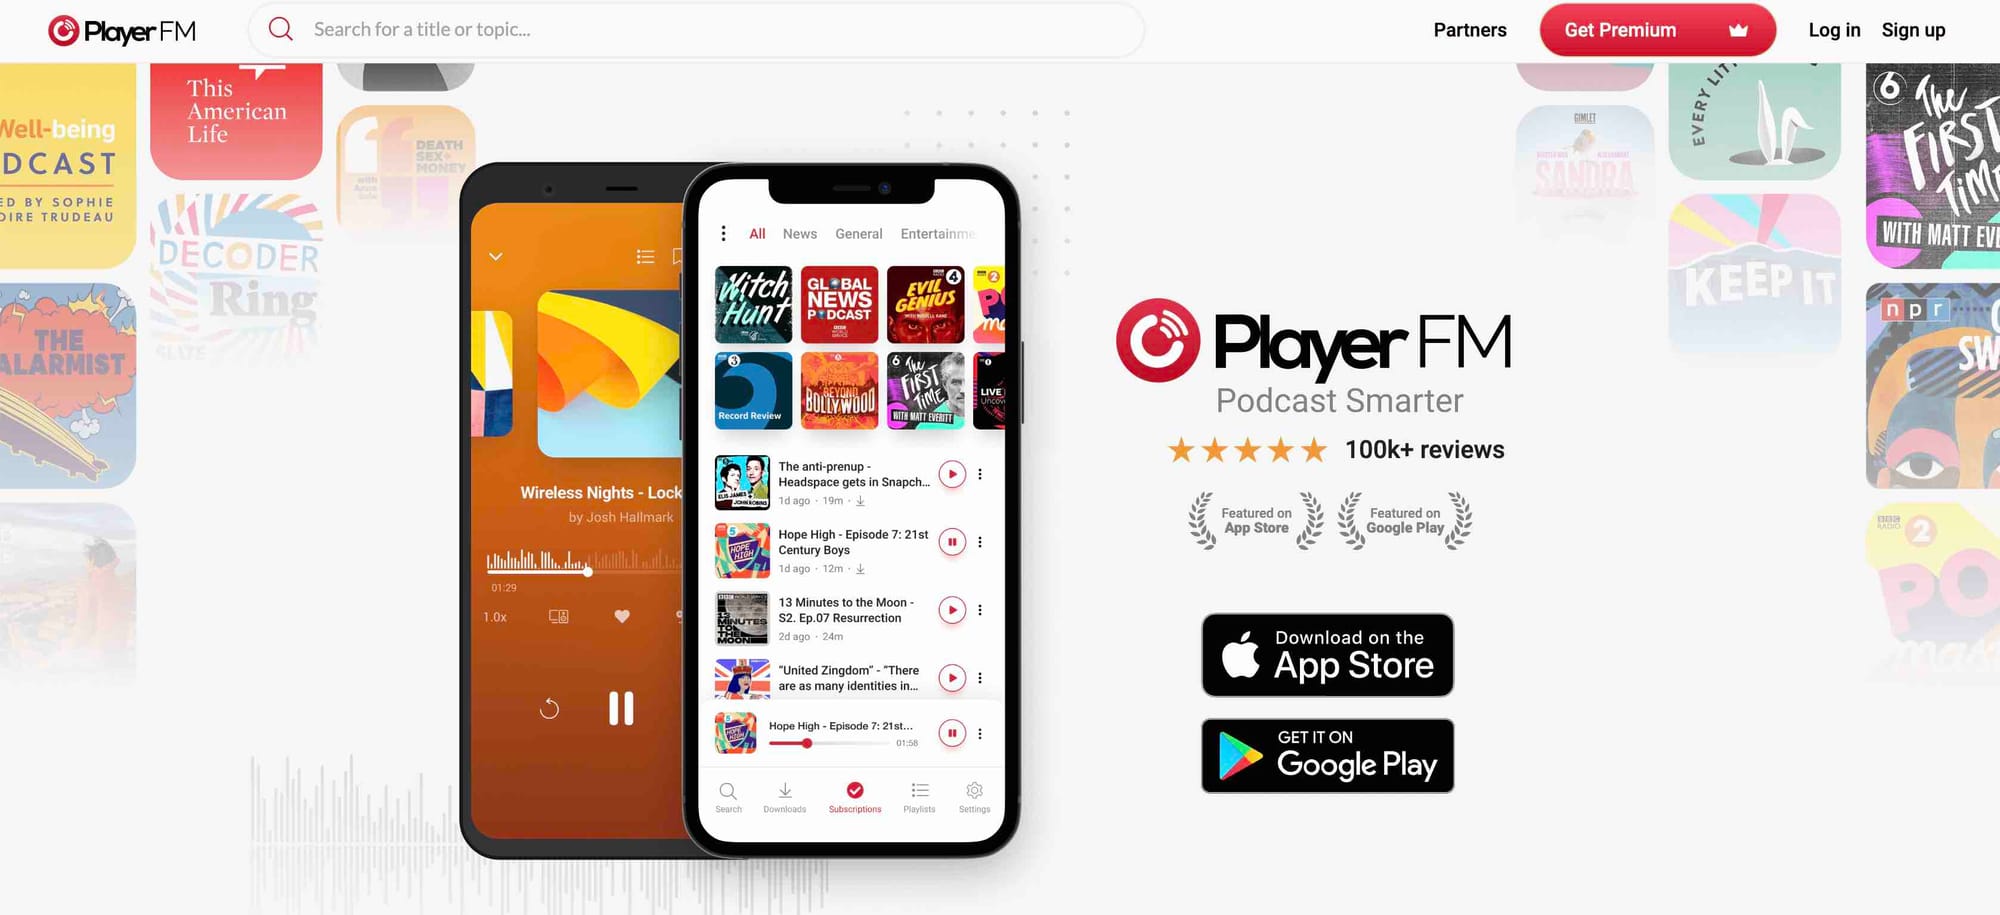 Player FM's homepage